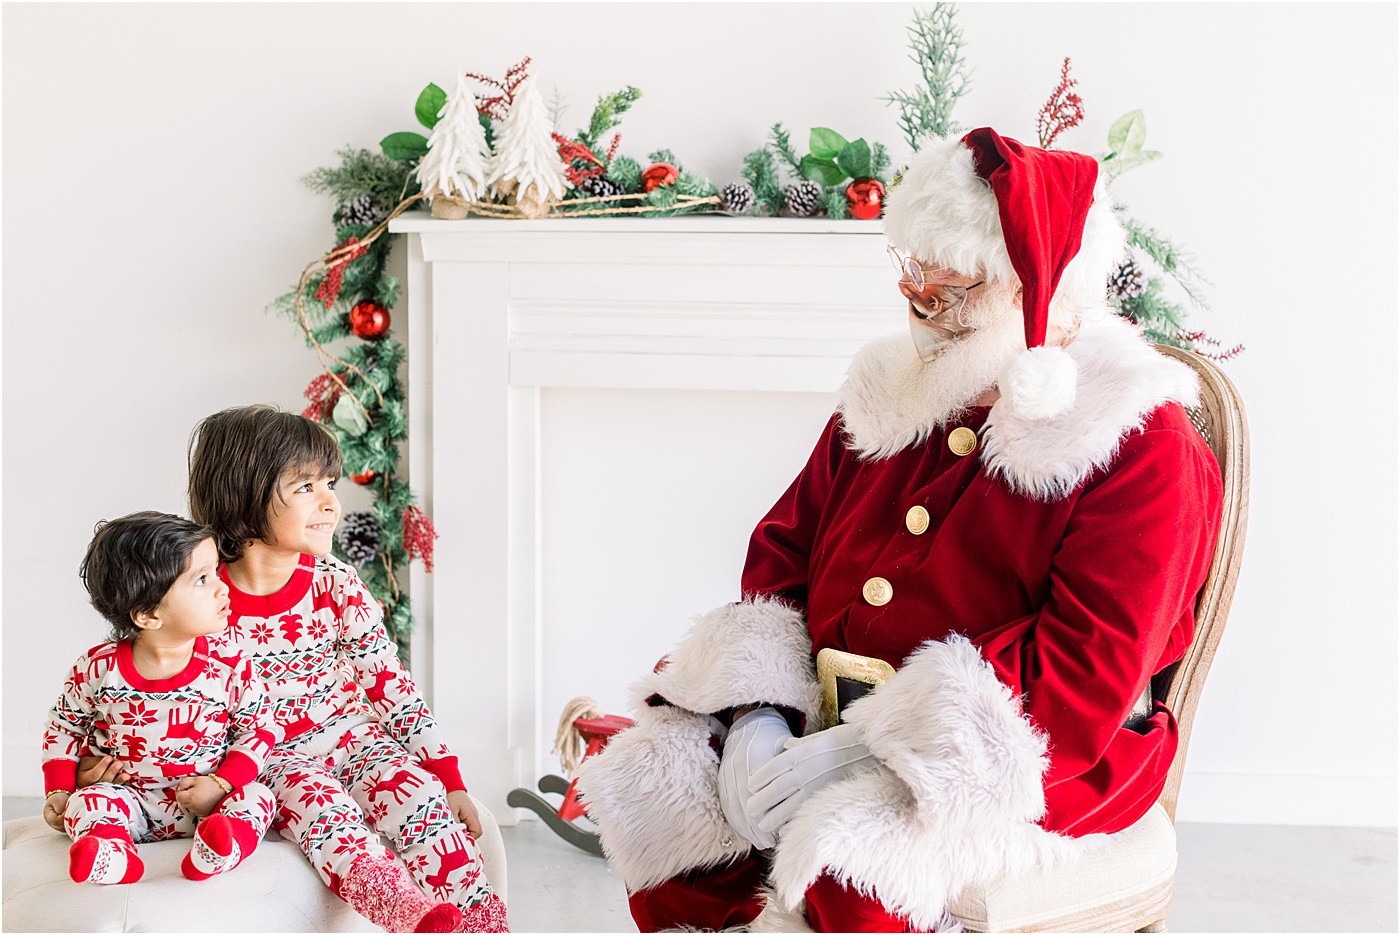 Santa wearing mask with children smiling at him. Photo by Sana Ahmed Photography.